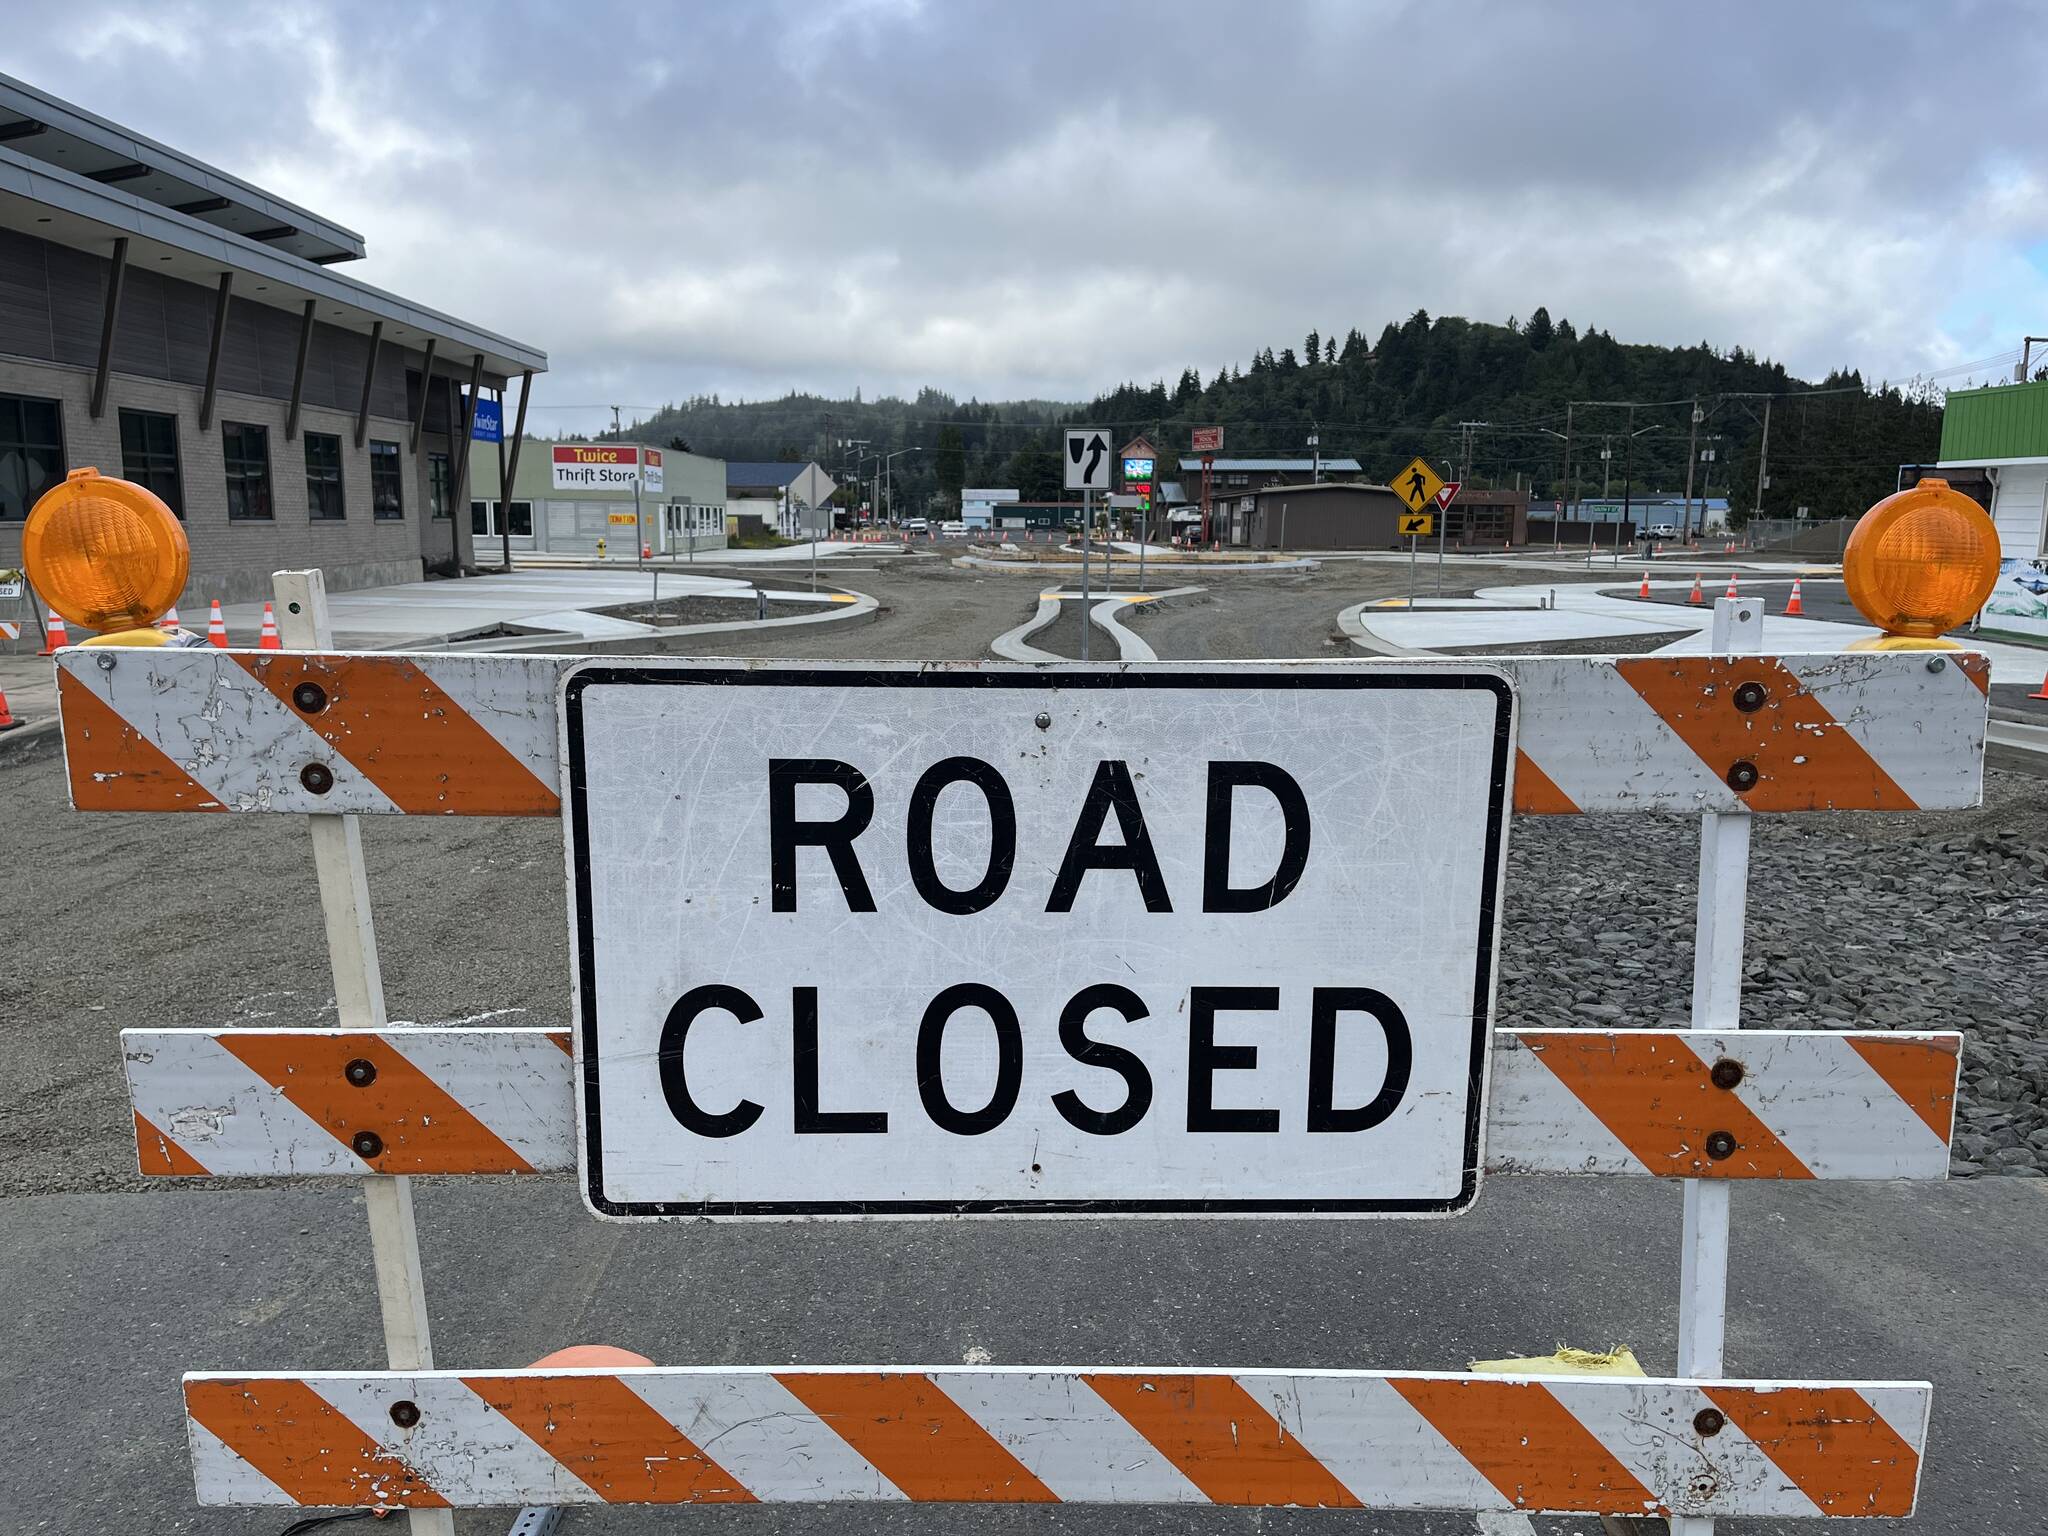 This road closed sign will leave East Market Street after a ribbon-cutting ceremony at noon Wednesday, Sept. 14. The ceremony will celebrate the opening of the roundabout that is replacing the five-way intersection between F Street, East Market Street, and Fuller Way. (Matthew N. Wells | The Daily World)